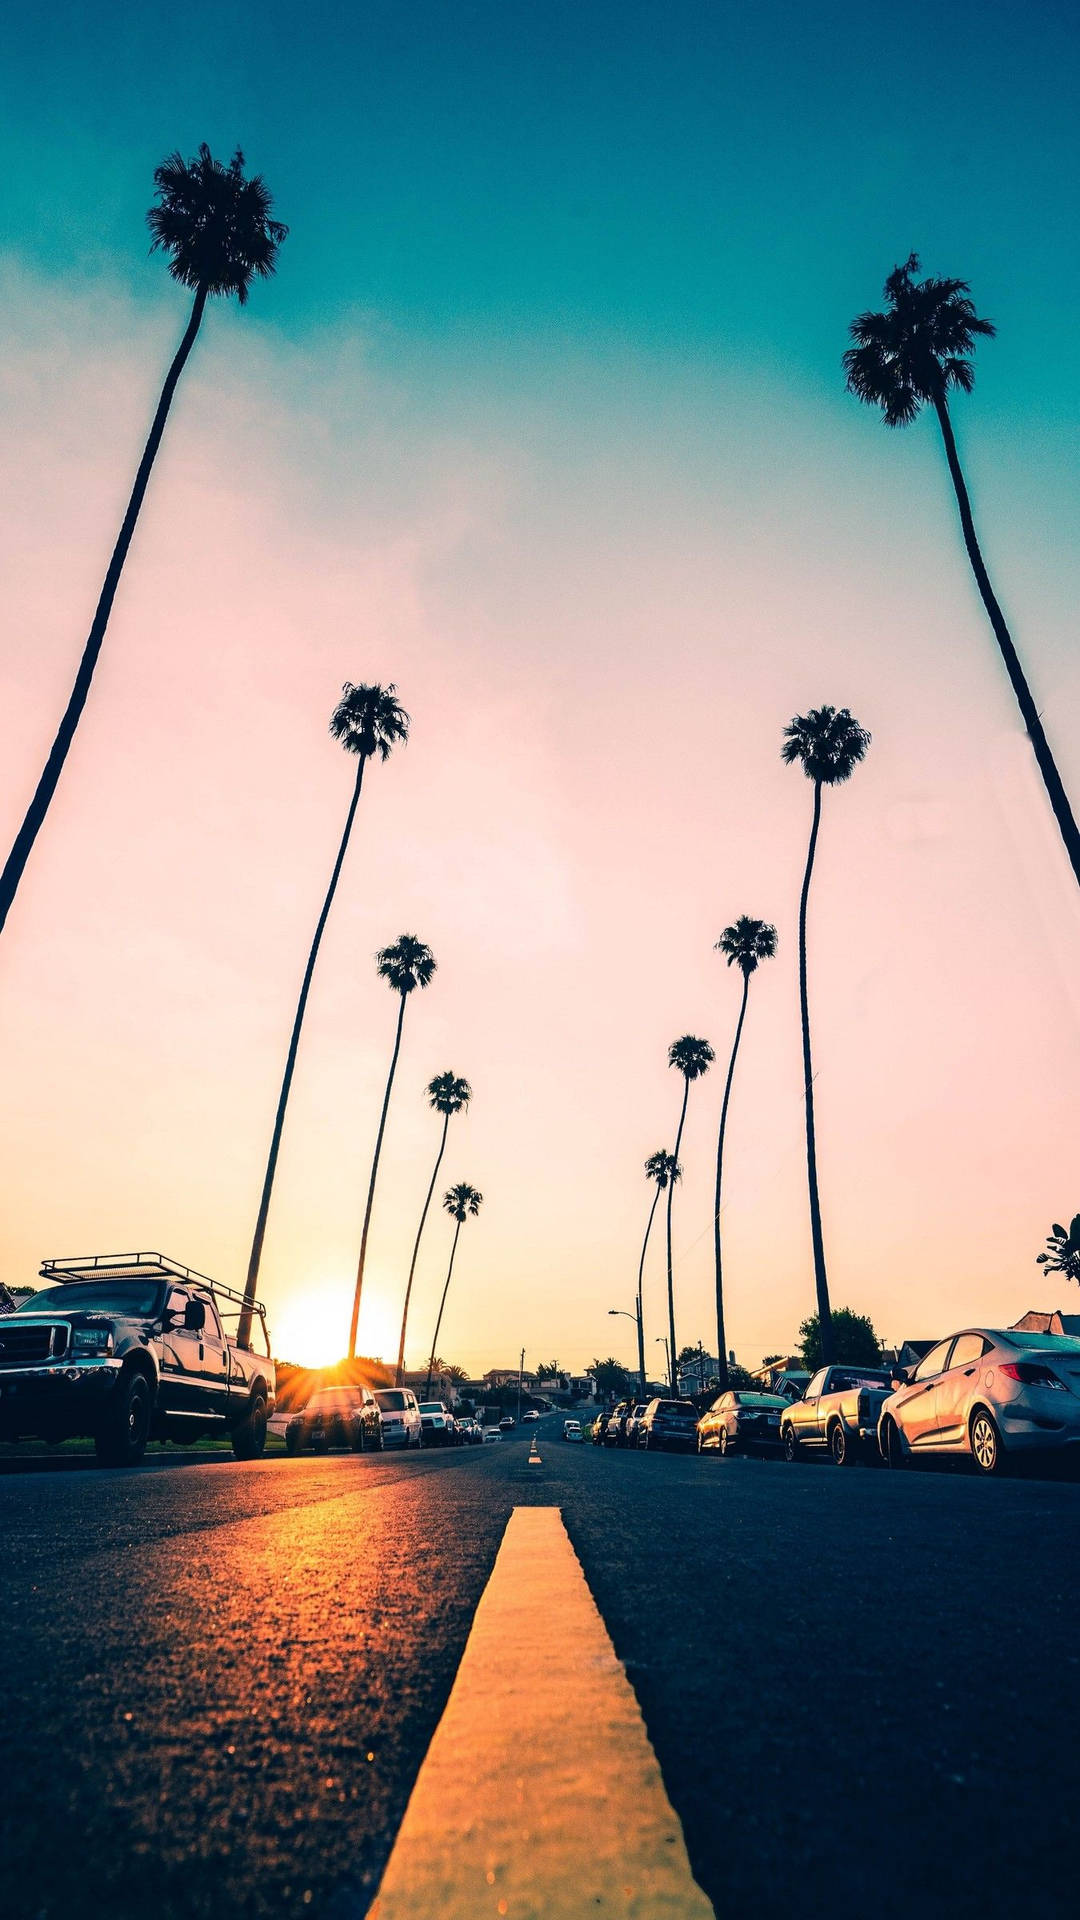 Iphone California Cars And Palm Trees Wallpaper